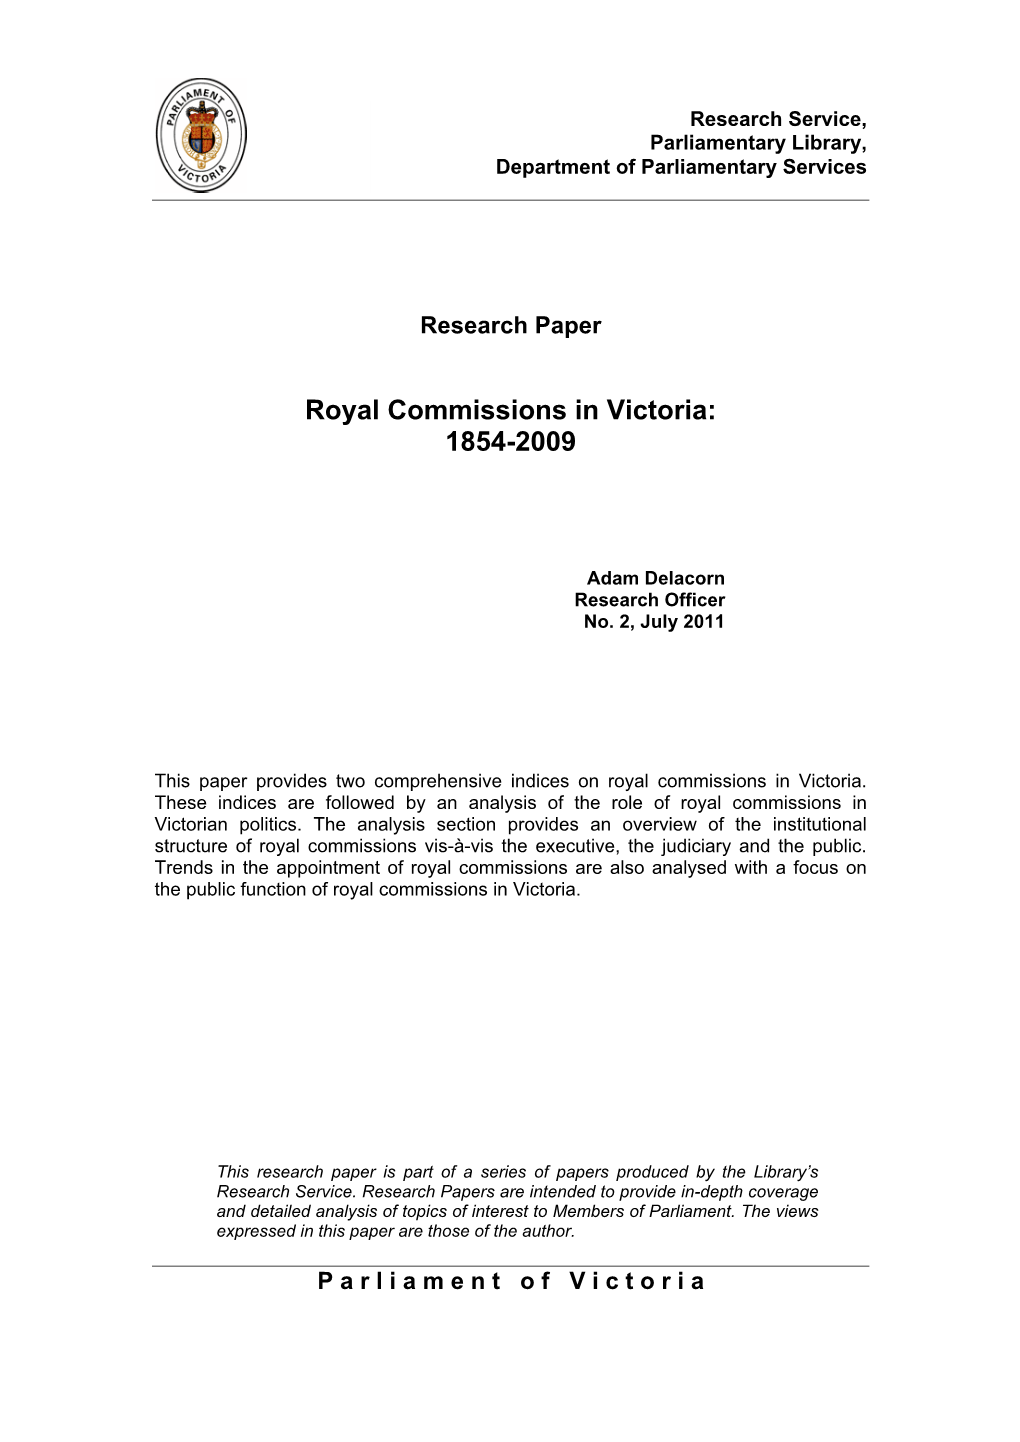 Royal Commissions in Victoria: 1854-2009